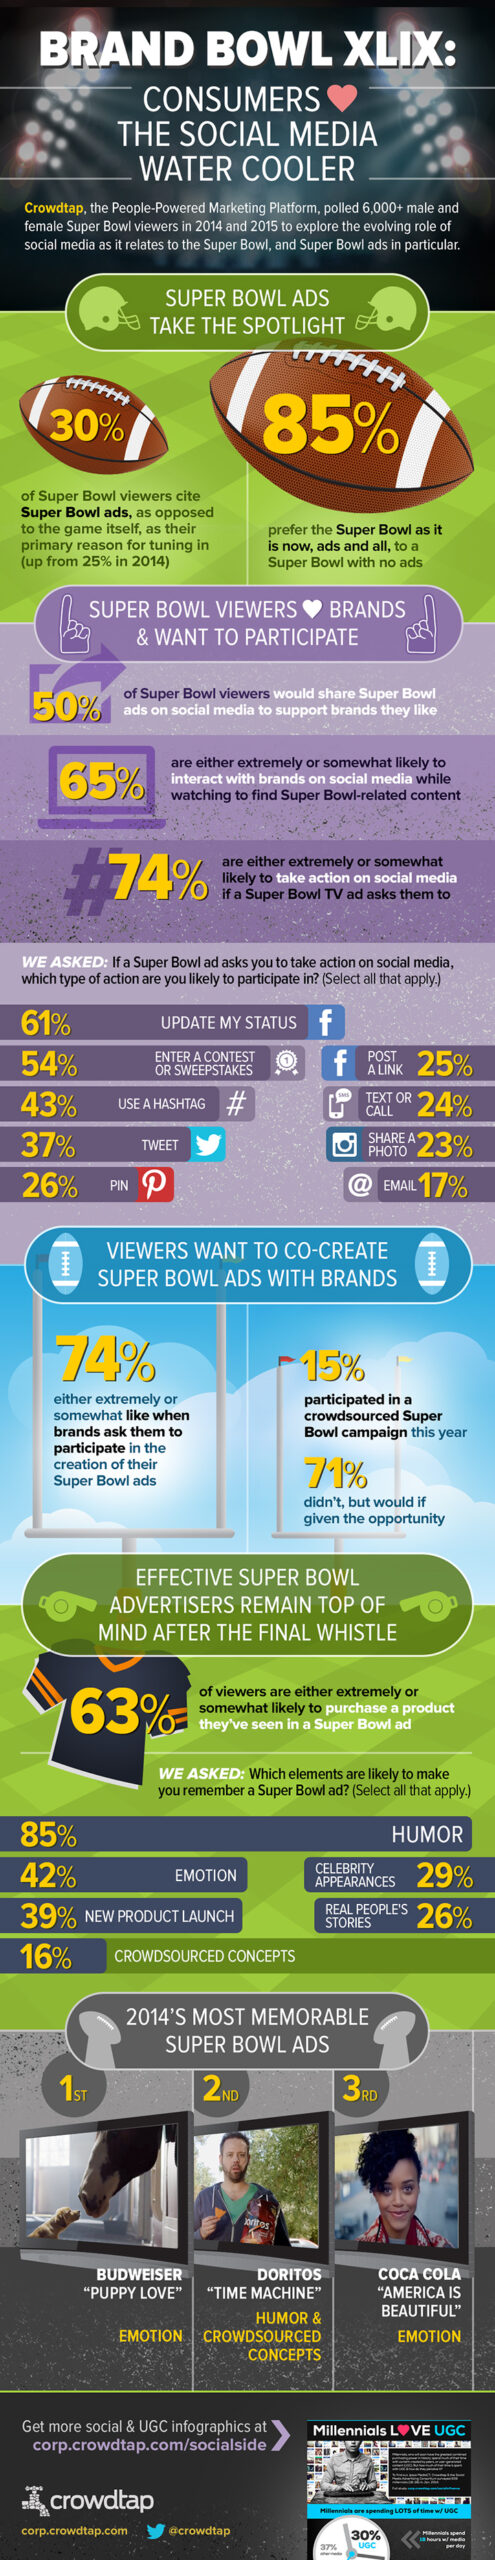 2015 superbowl advertising and search